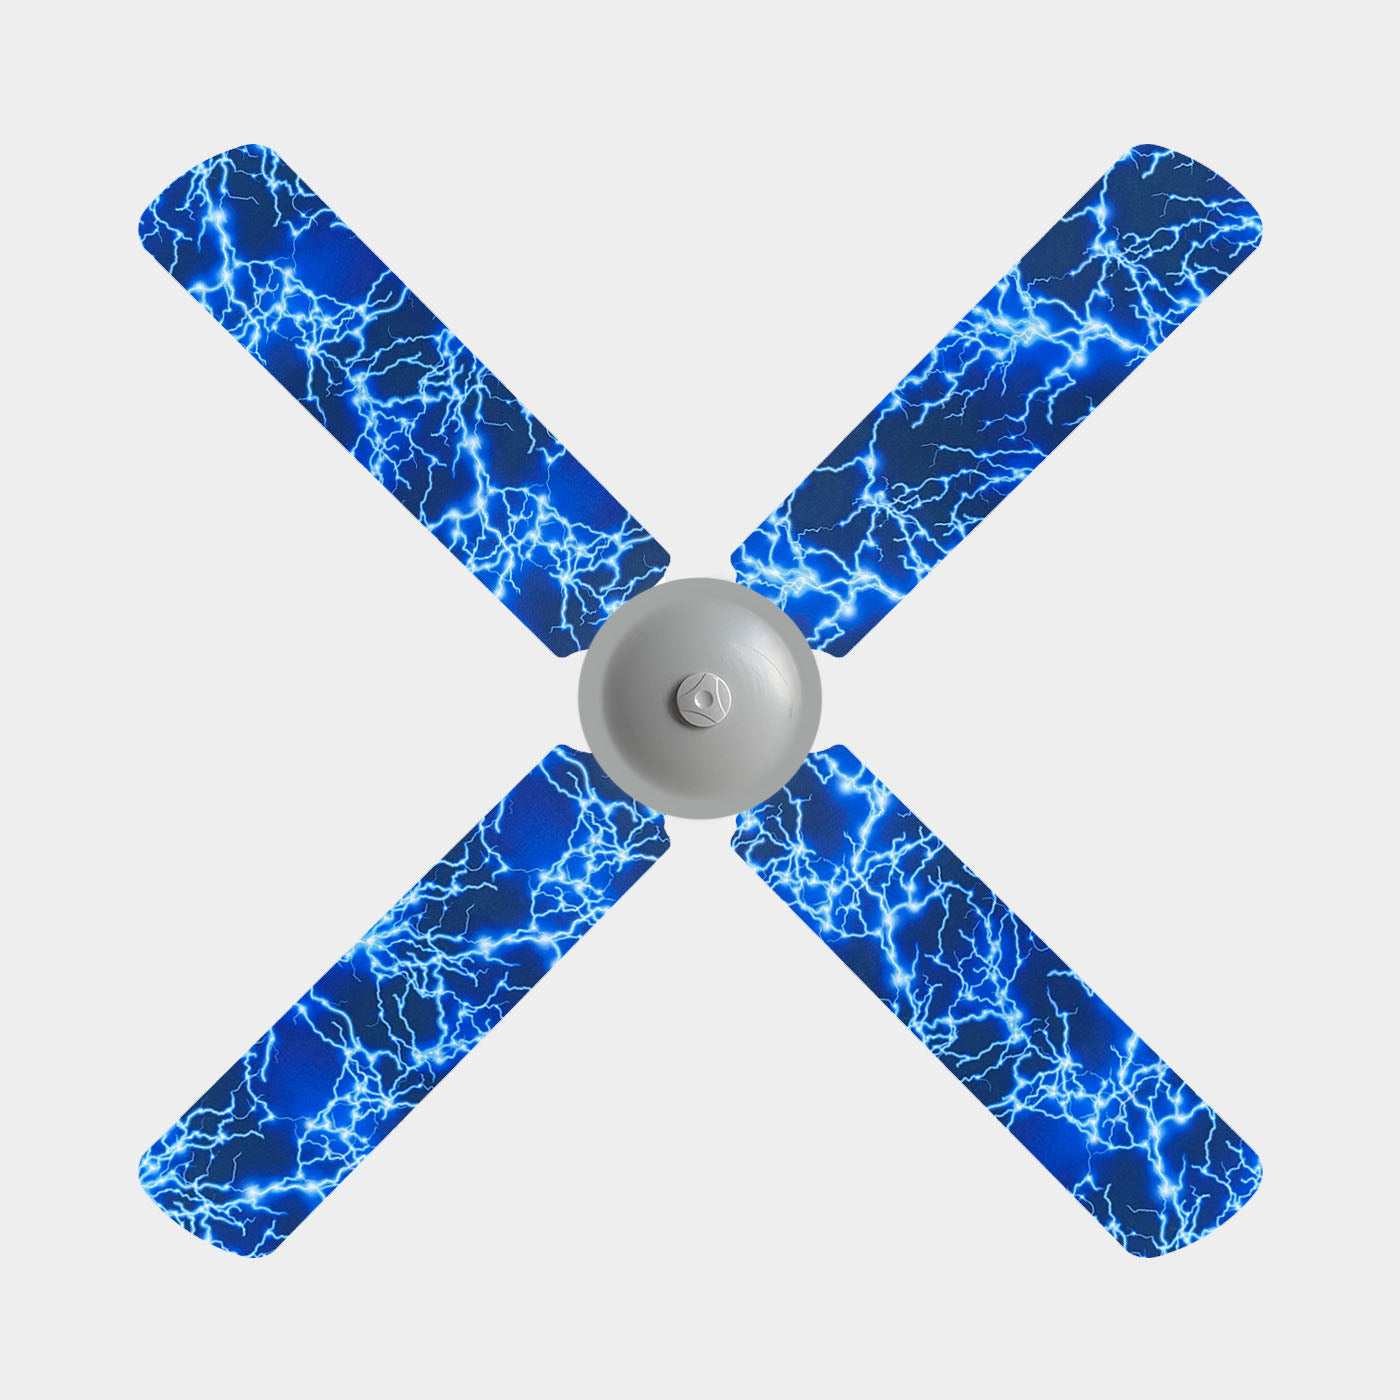 Fabric fan blade covers with blue and white lightning strikes on a 3 blade fan